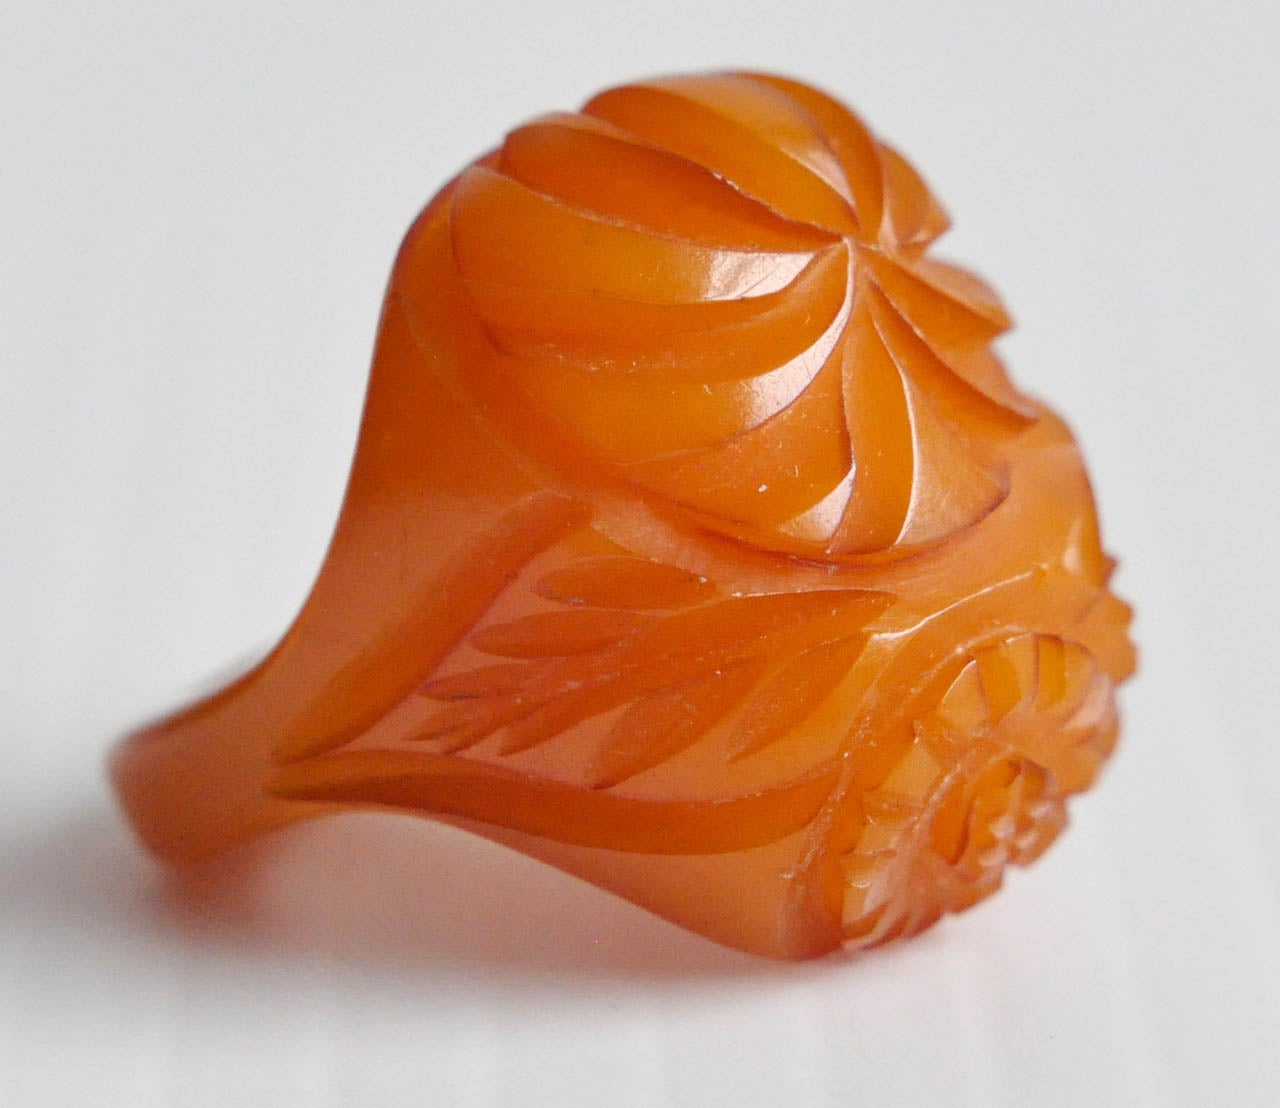 Nicely- carved butterscotch bakelite ring in a very wearable size.  Beautiful design and detail, rich bakelite color.

Ring size: Will comfortably fit a size 6 or 6 1/2